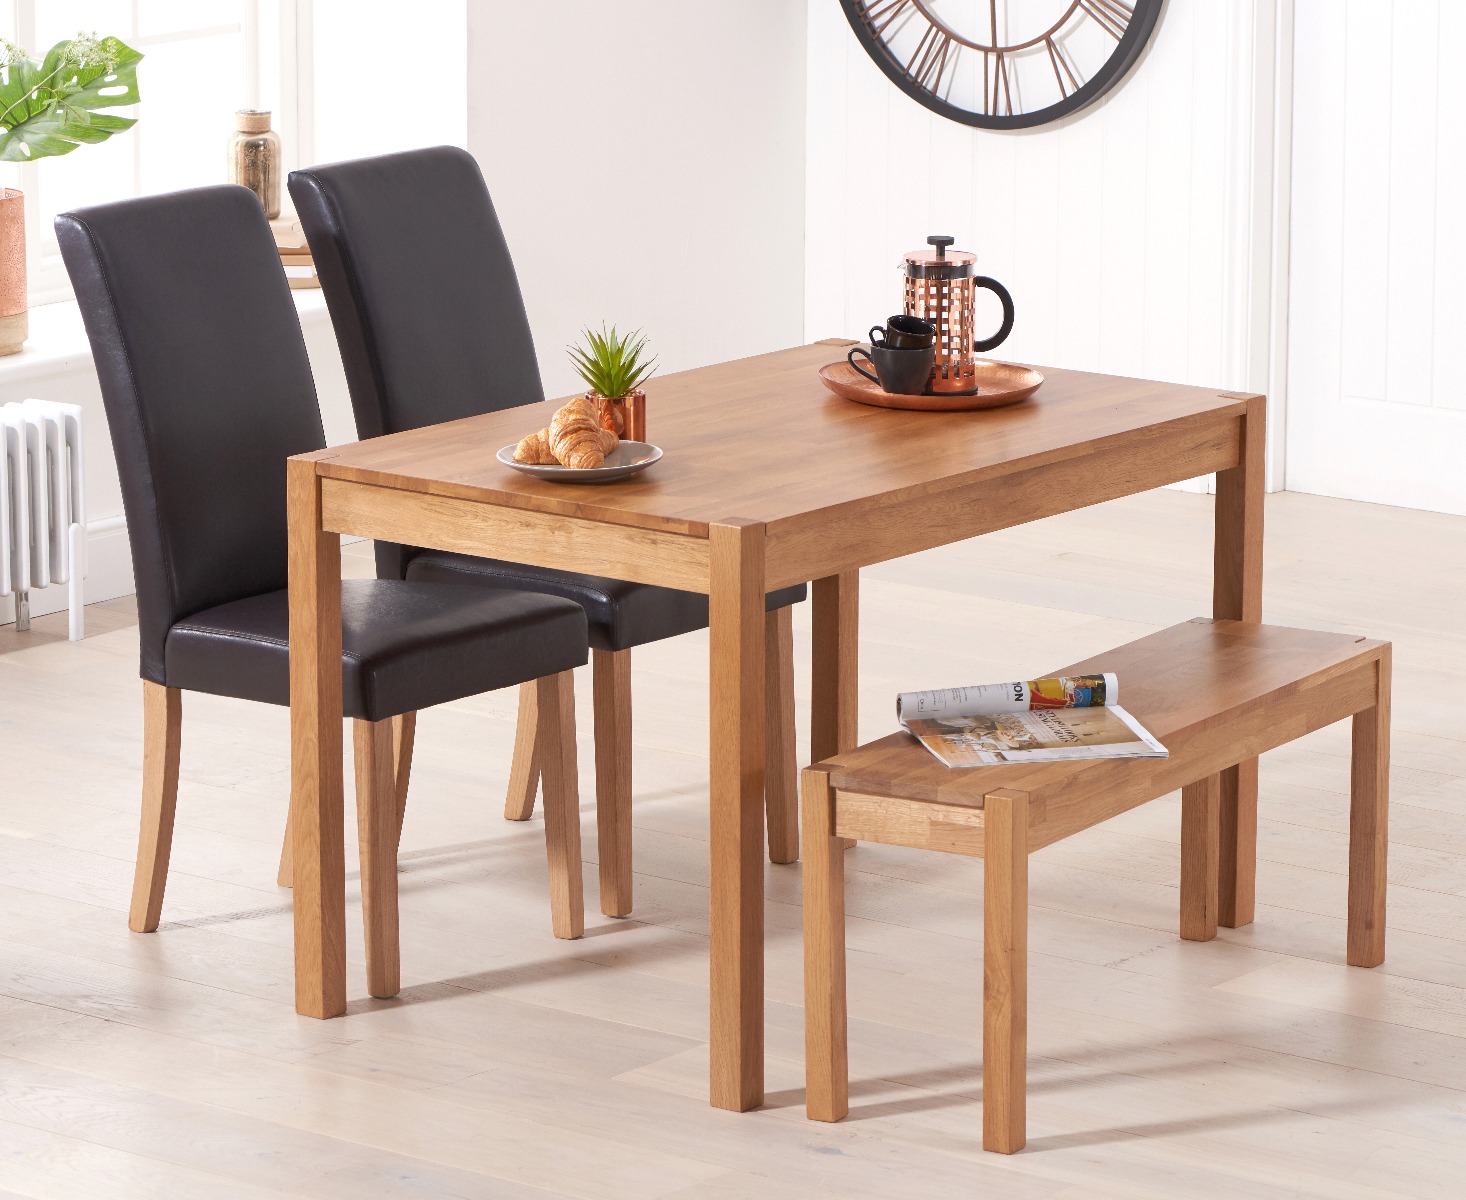 Photo 1 of York 120cm solid oak dining table with 4 grey olivia chairs with 2 oak benches